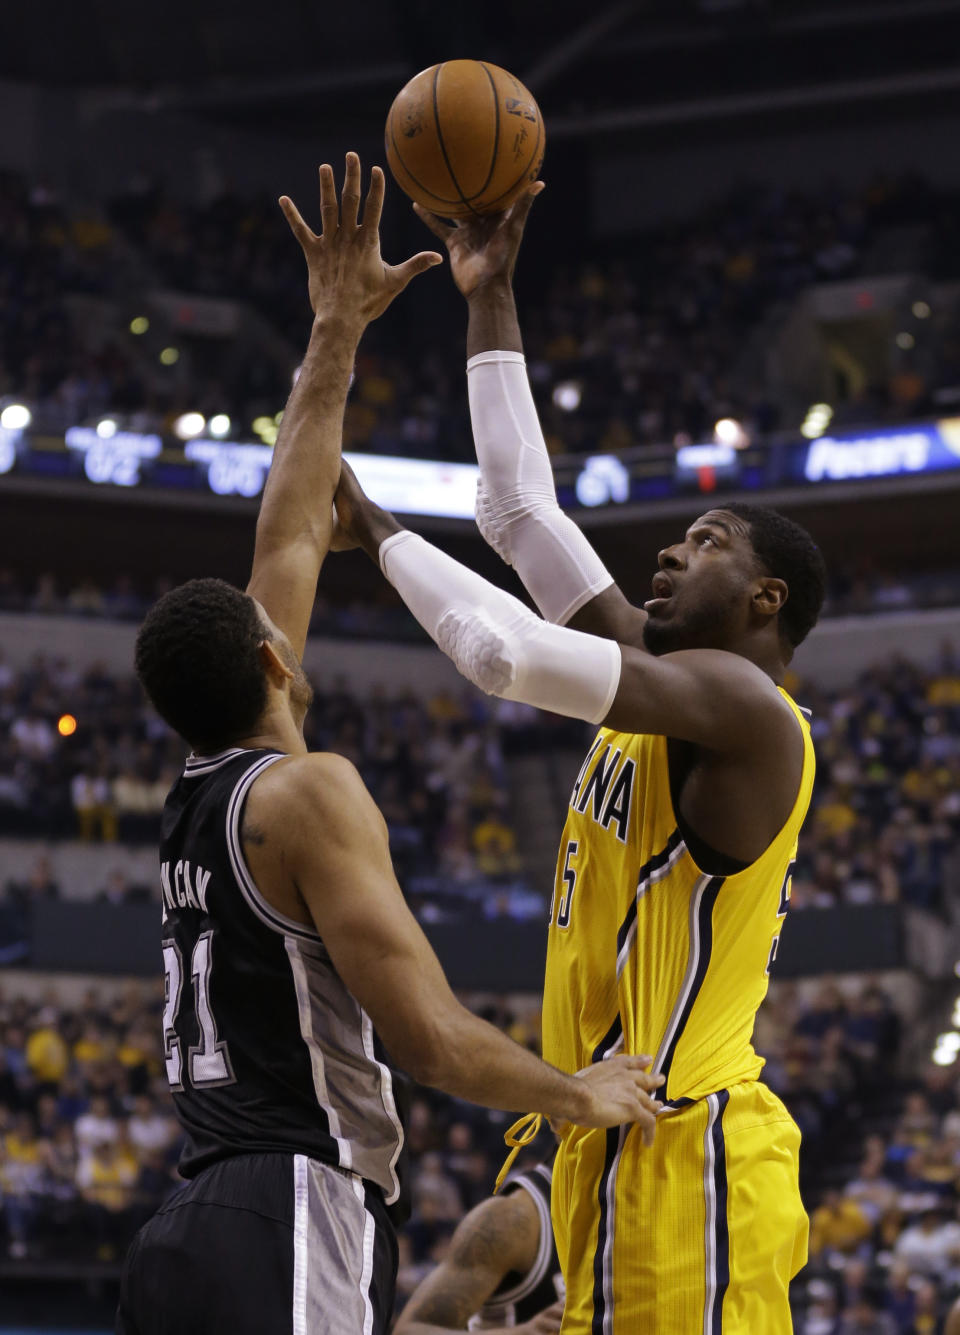 Indiana Pacers center Roy Hibbert, right, shoots over San Antonio Spurs forward Tim Duncan in the first half of an NBA basketball game in Indianapolis, Monday, March 31, 2014. (AP Photo/Michael Conroy)